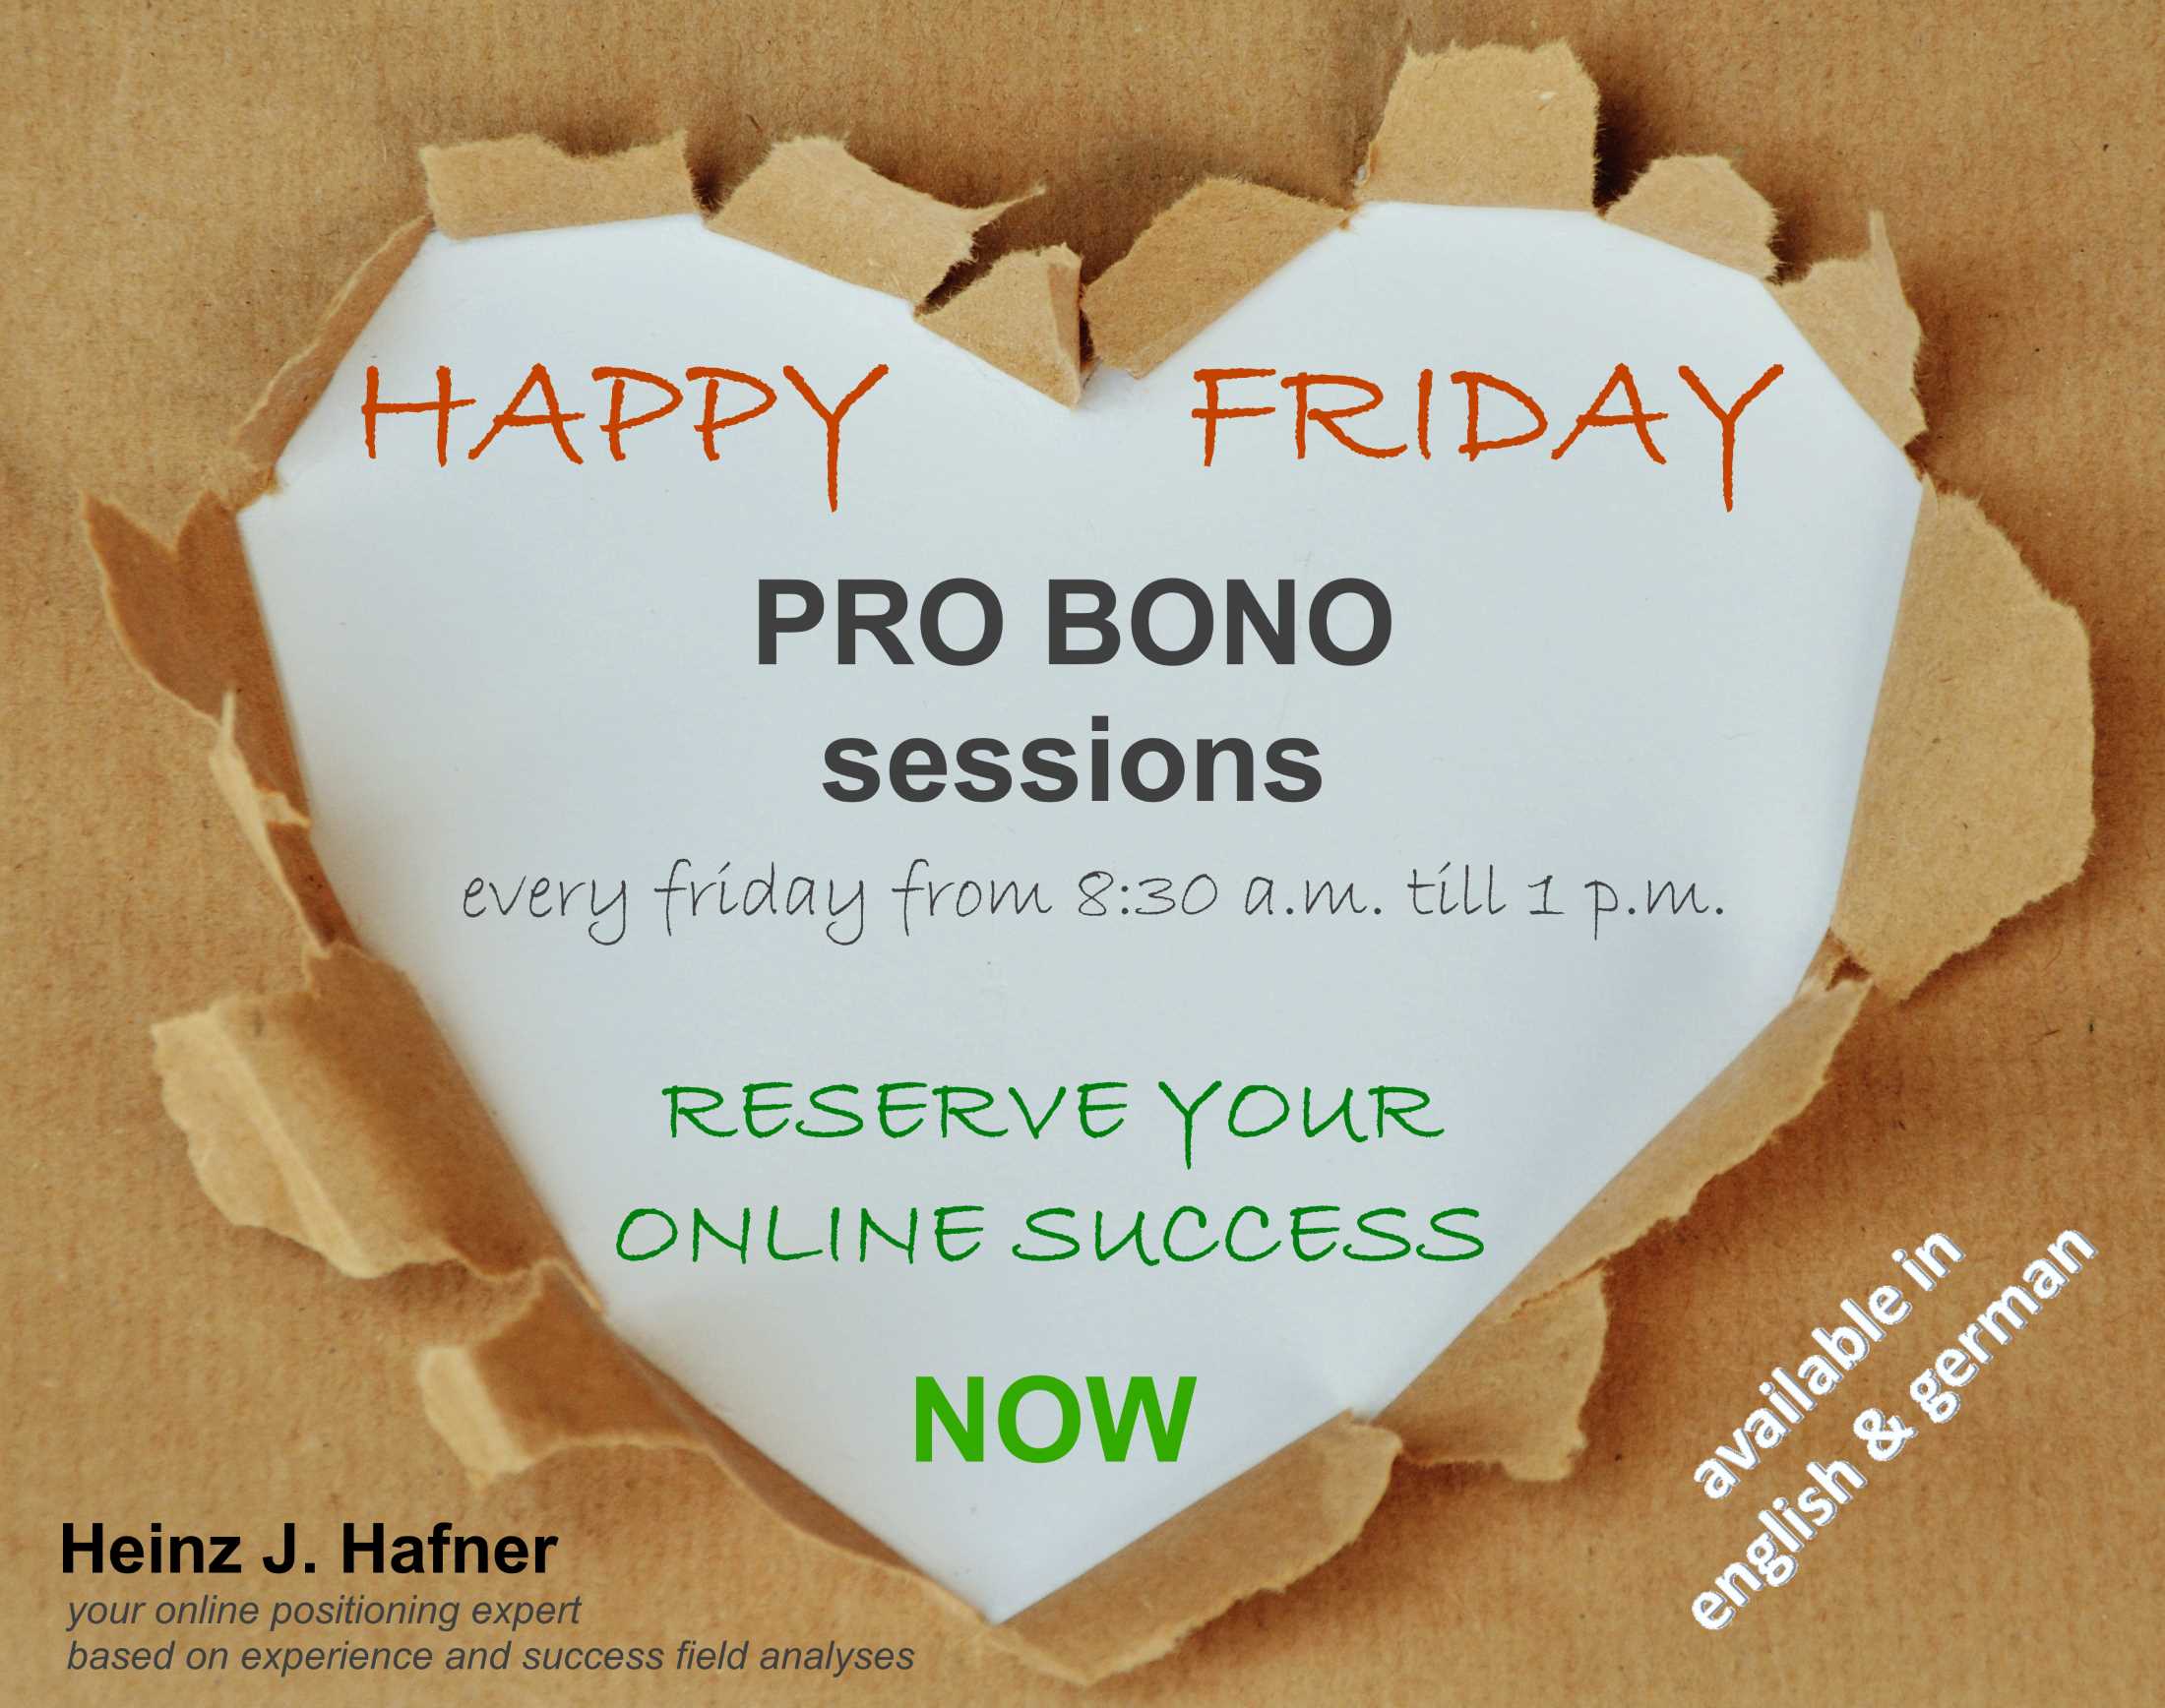 Happy Friday pro-bono sessions for your online success